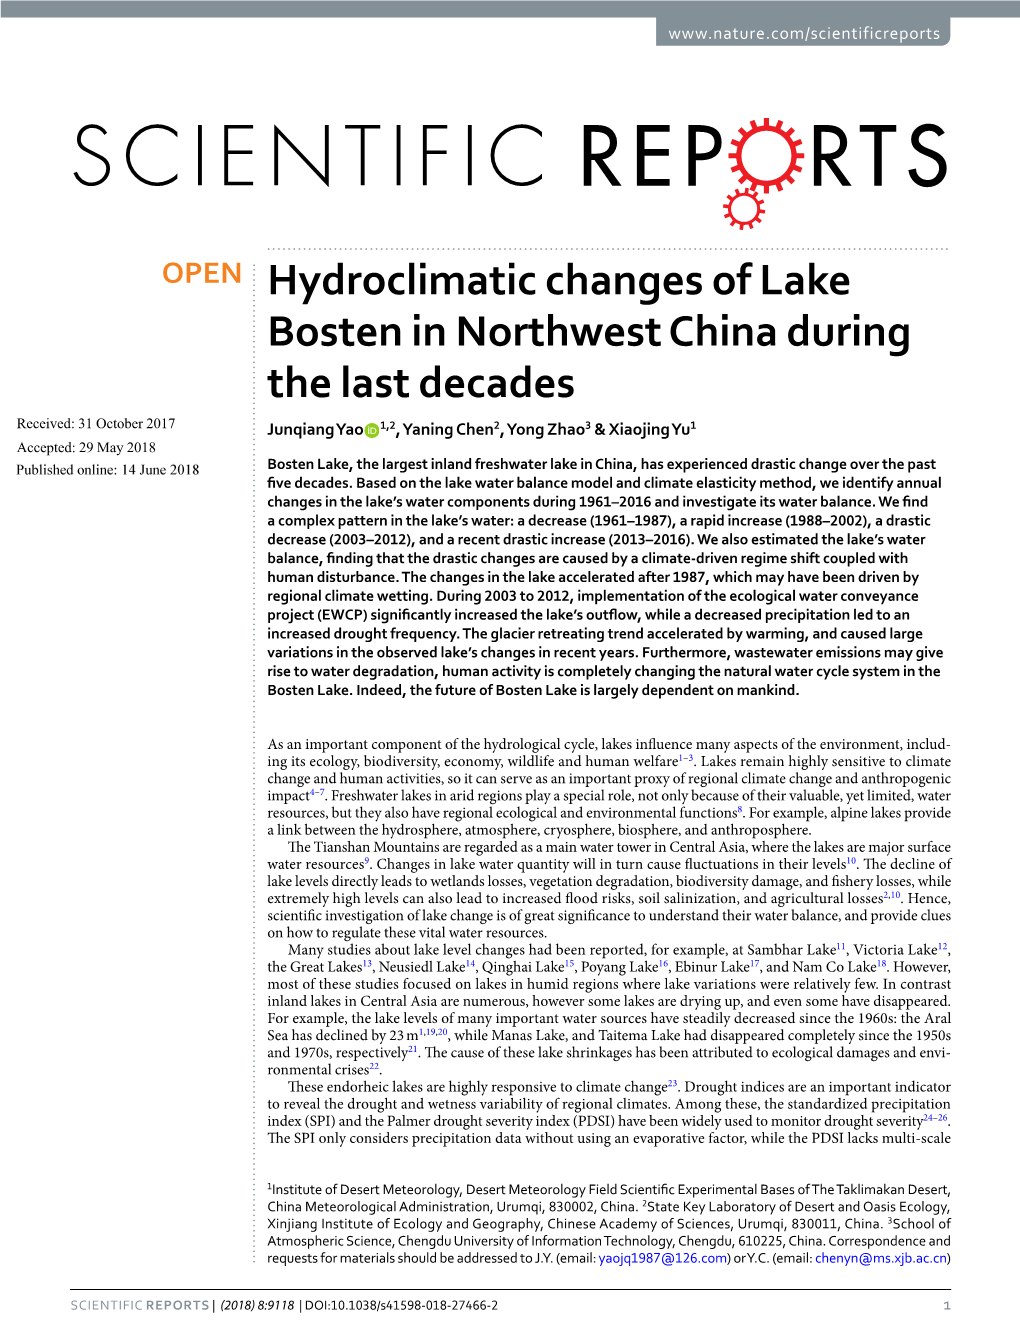 Hydroclimatic Changes of Lake Bosten in Northwest China During the Last